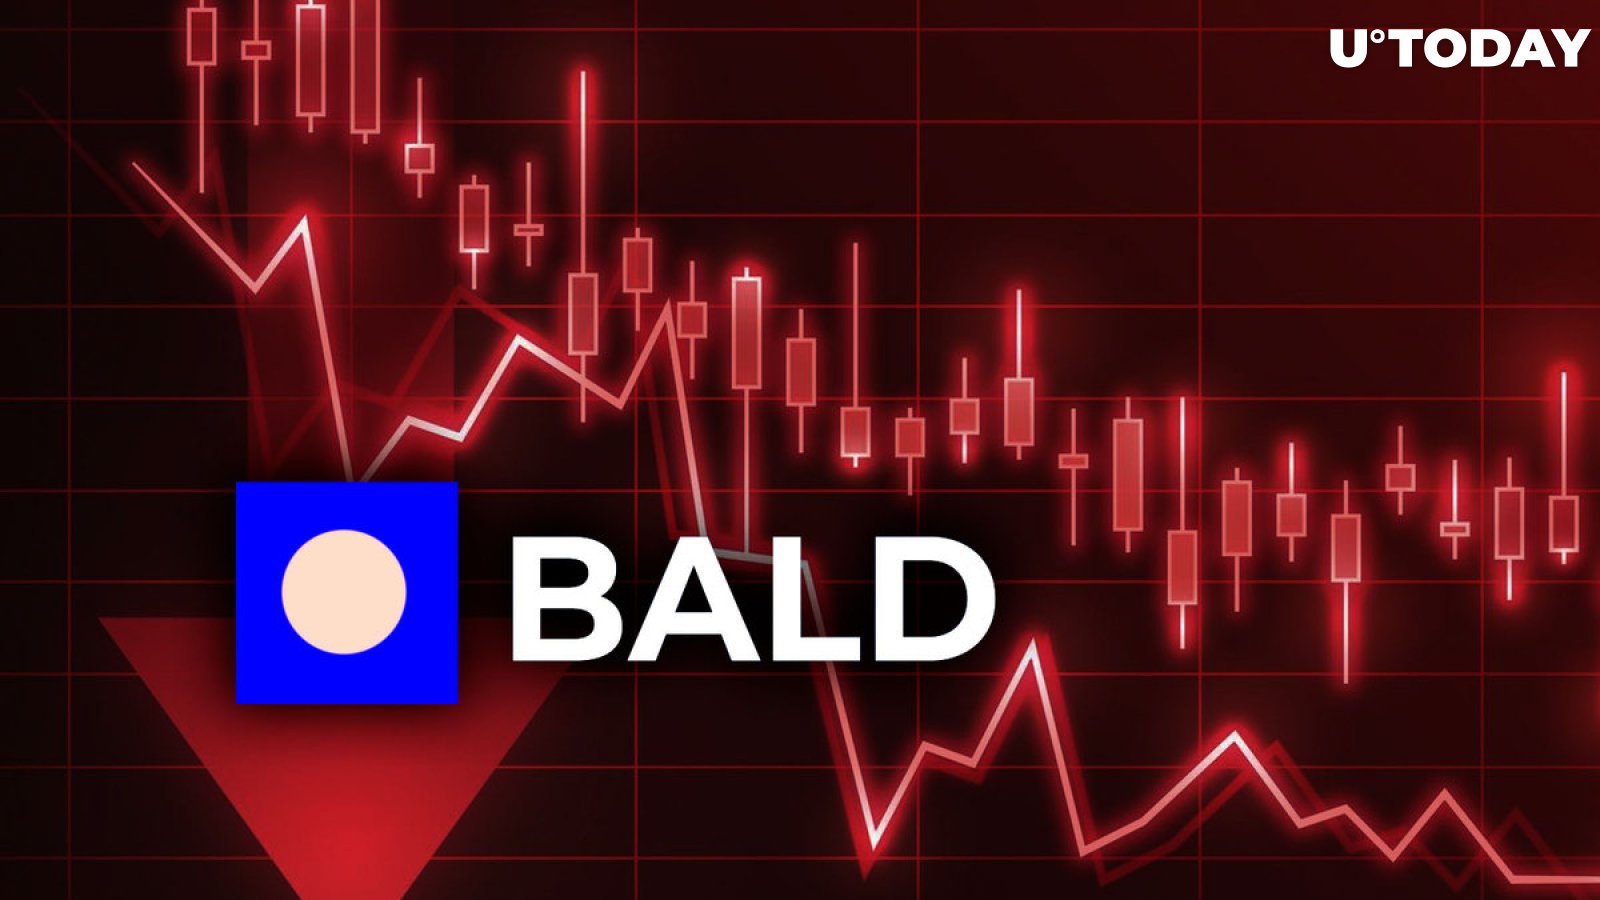 BALD Meme Coin Plunges to Zero in Wake of Rug Pull